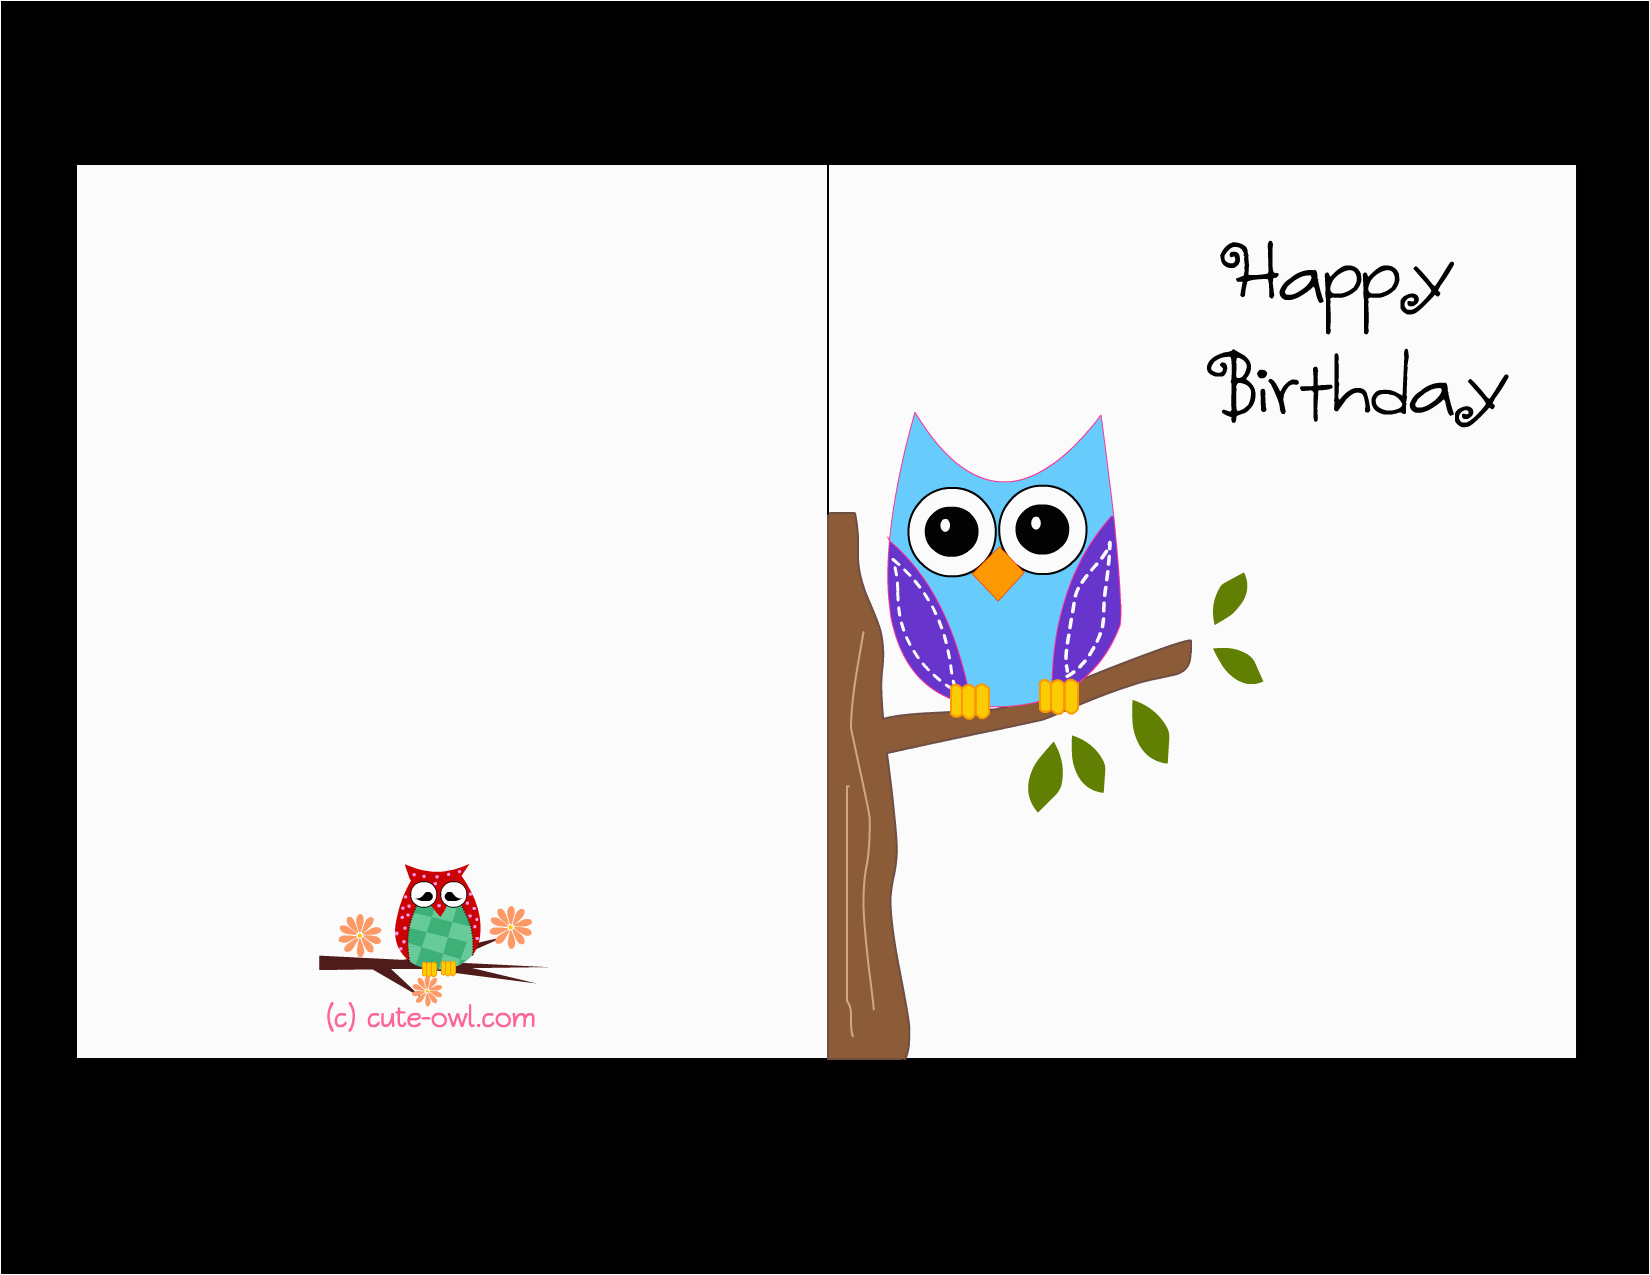 Free Printable Birthday Cards For Girls | Birthdaybuzz - Free Printable Birthday Cards For Boys